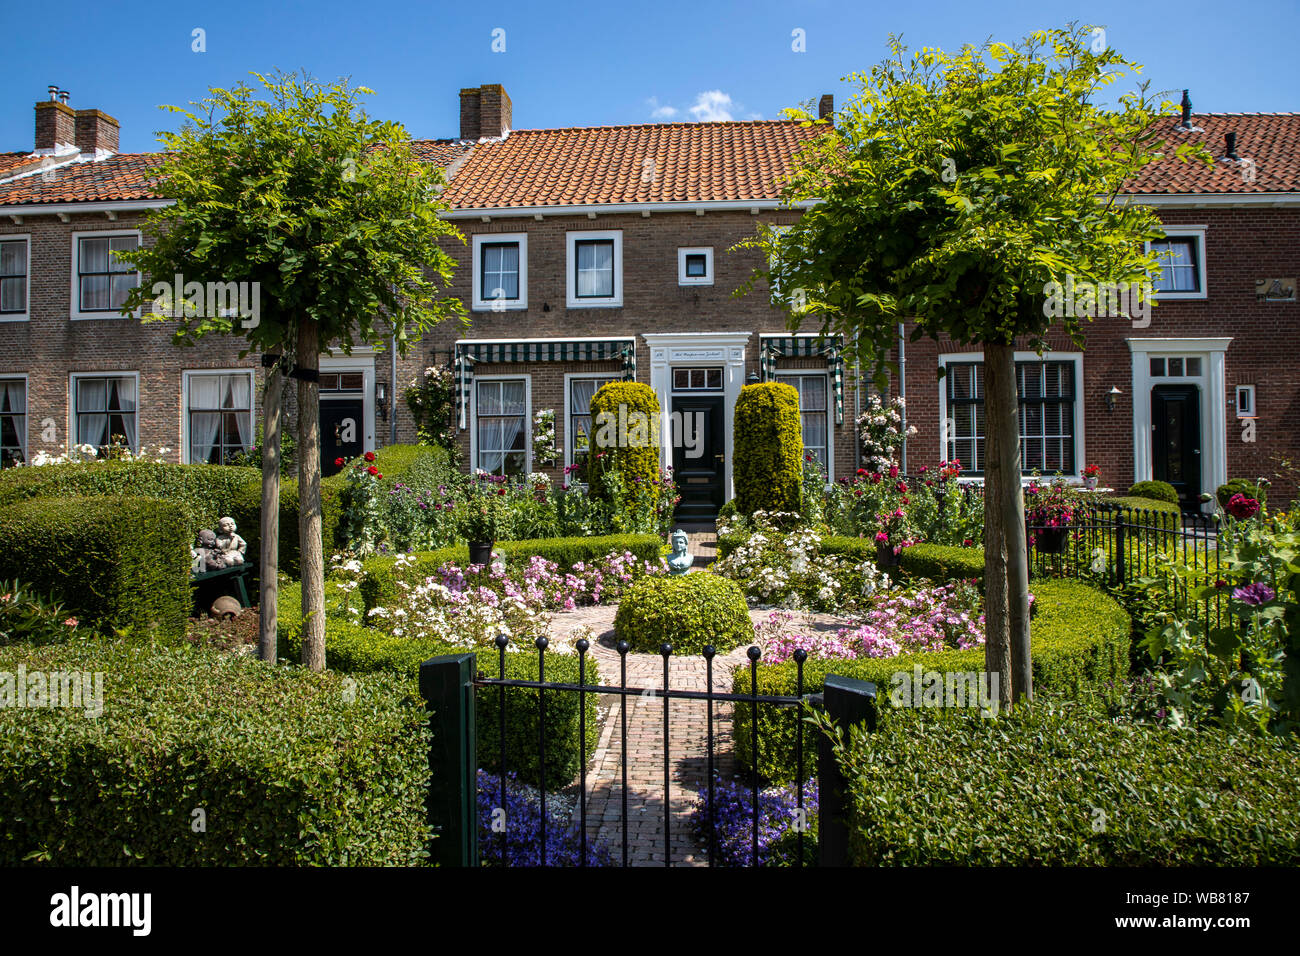 The town of Veere, Zeeland province, Netherlands, the old town hall, market square, cafés and shops, residential buildings with gardens, Stock Photo